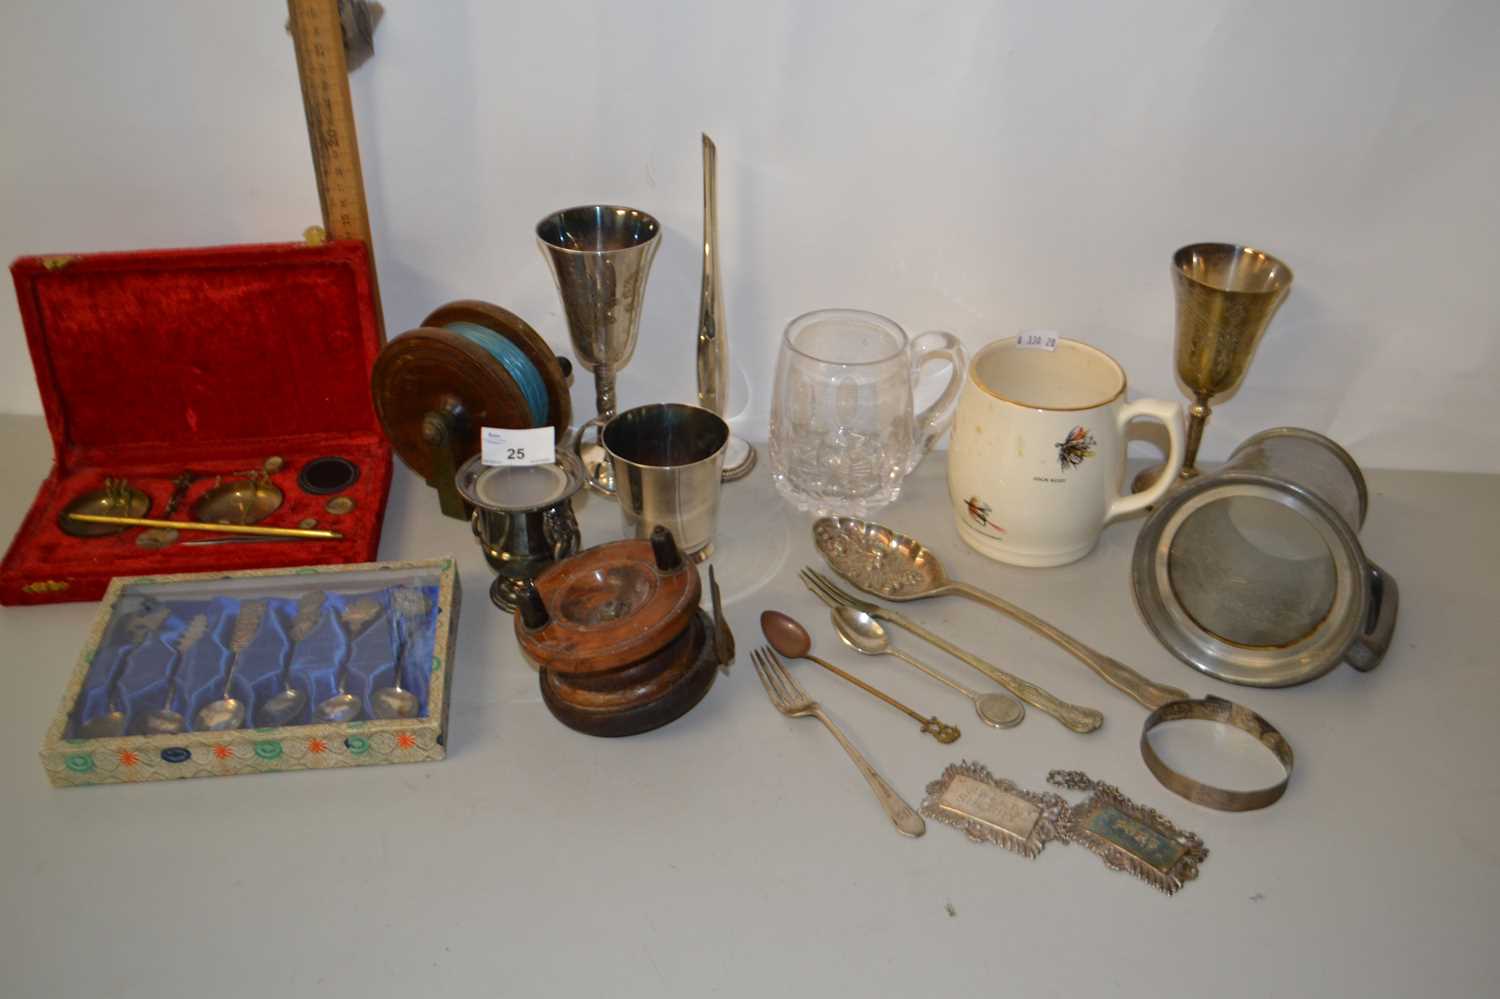 Mixed Lot: Vintage wooden fishing reels, pewter tankard, case Oriental spoons, portable beam